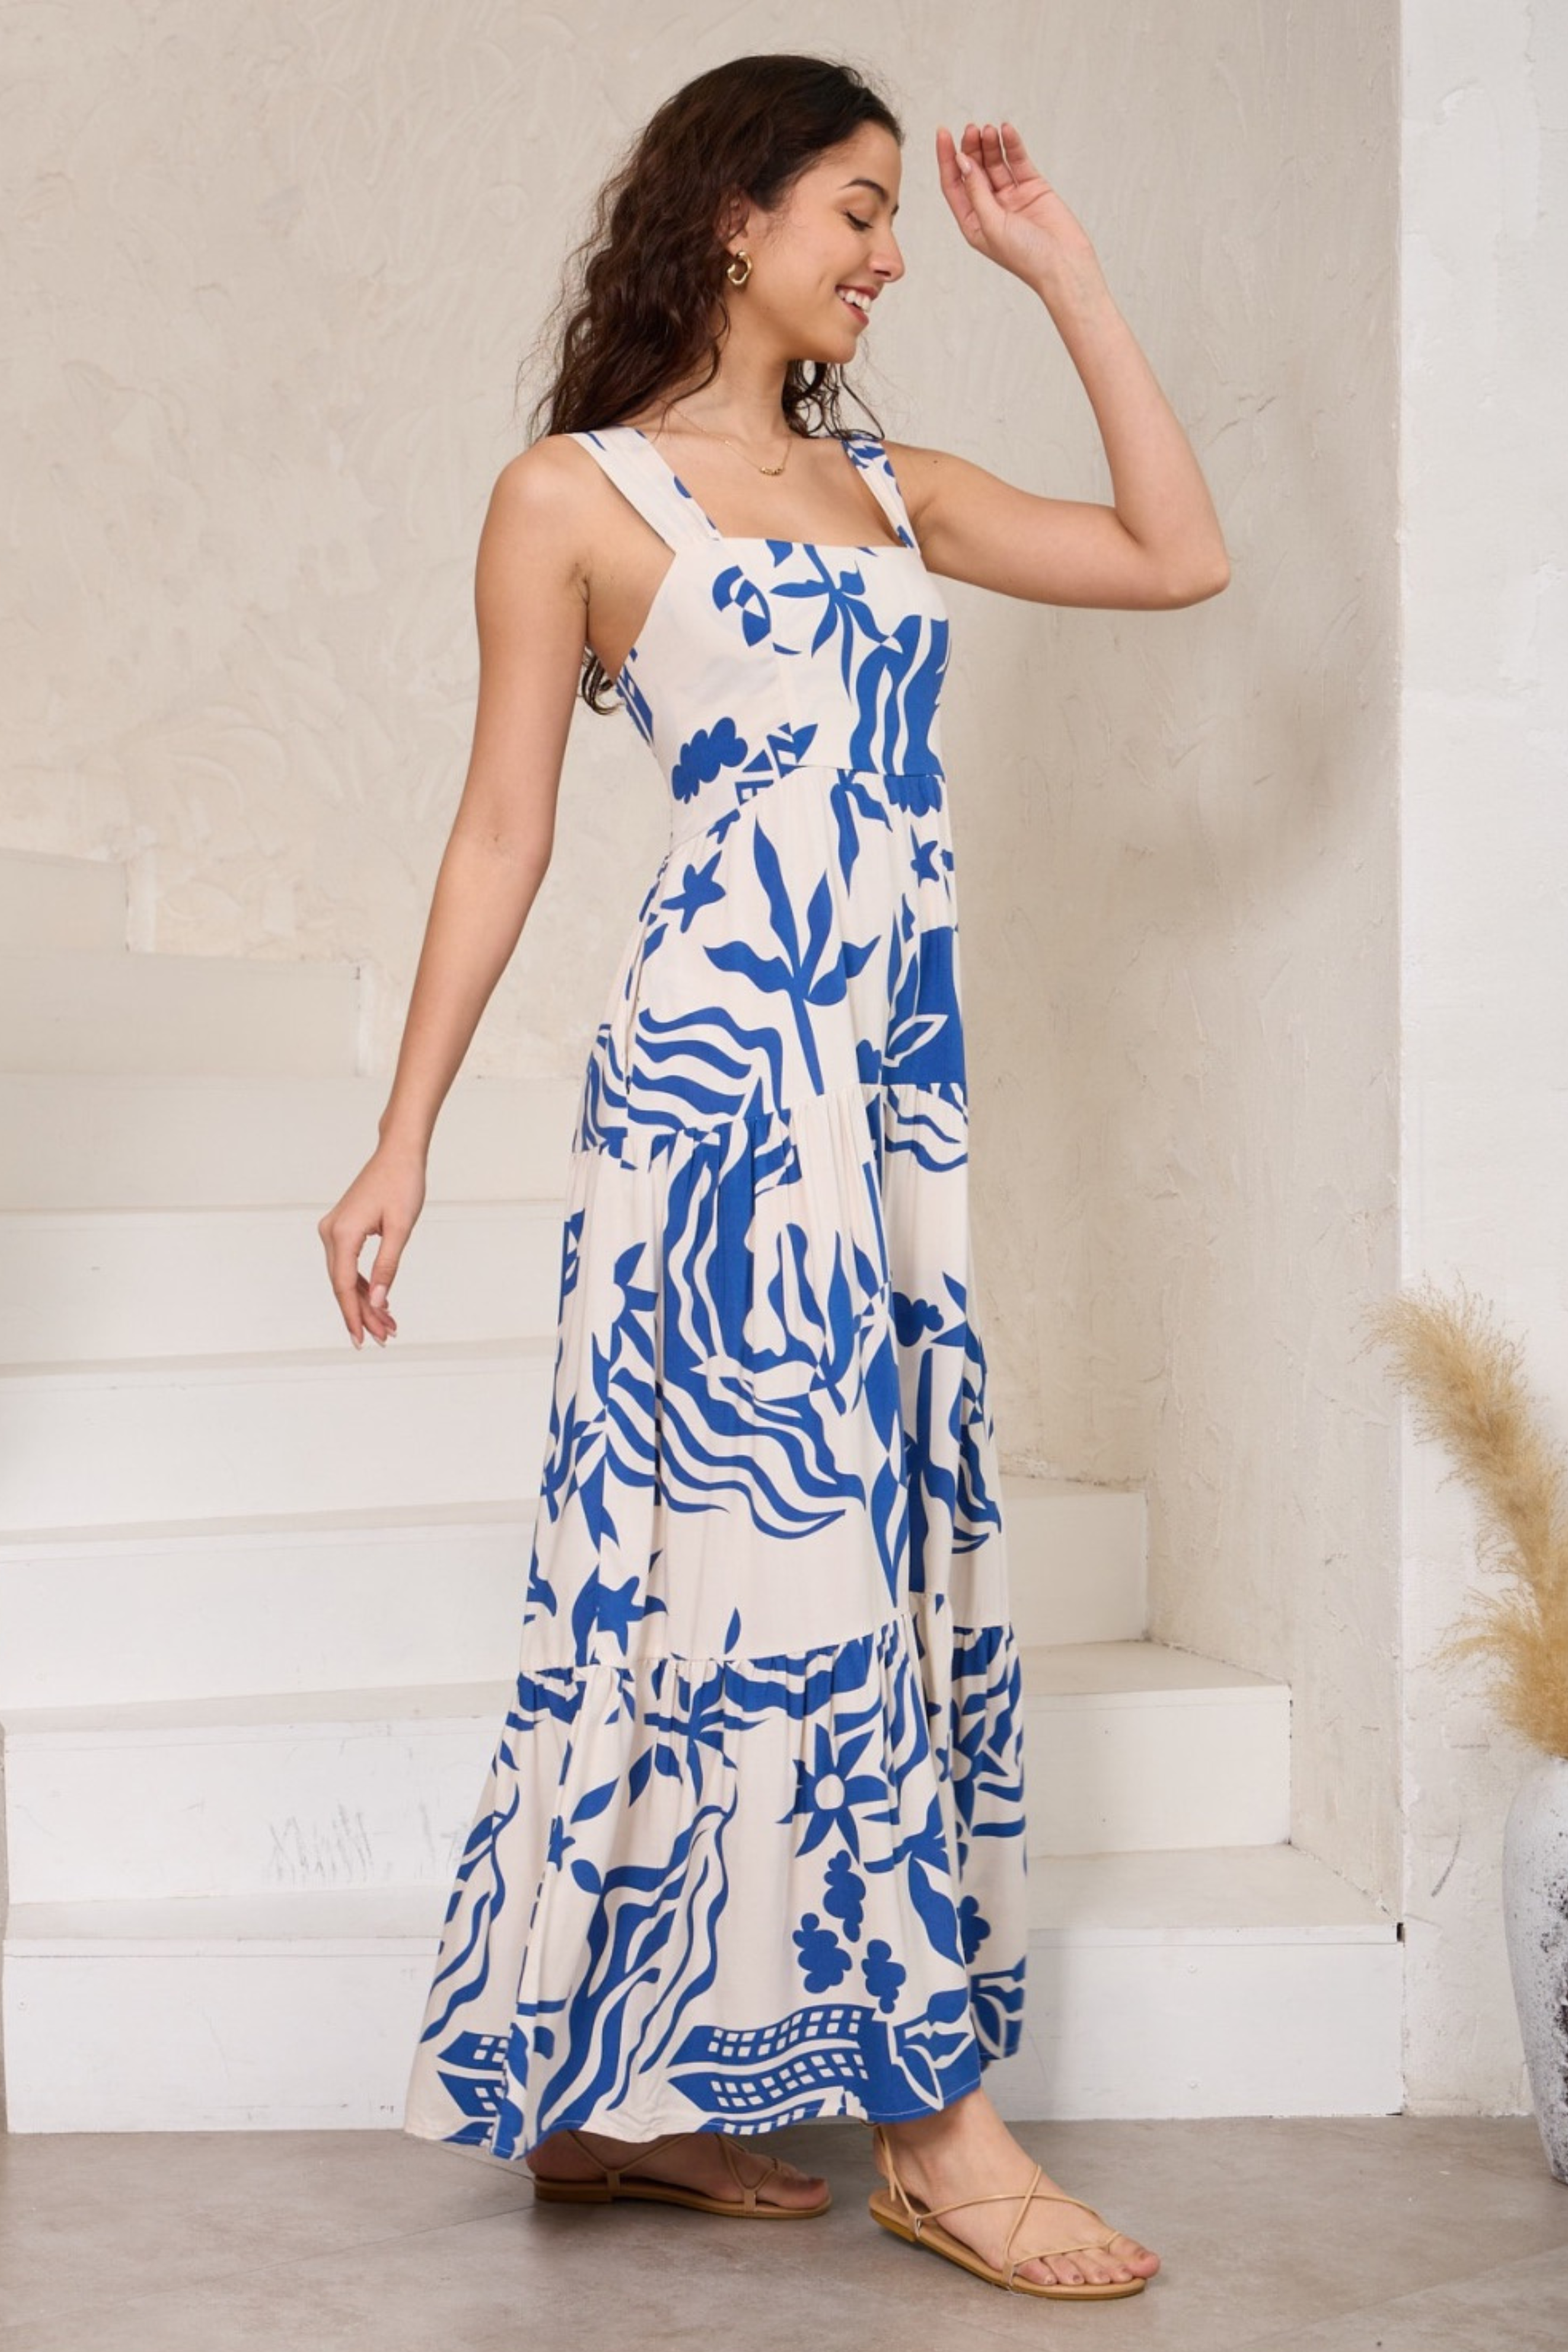 LILY Maxi Dress in Blue and Cream